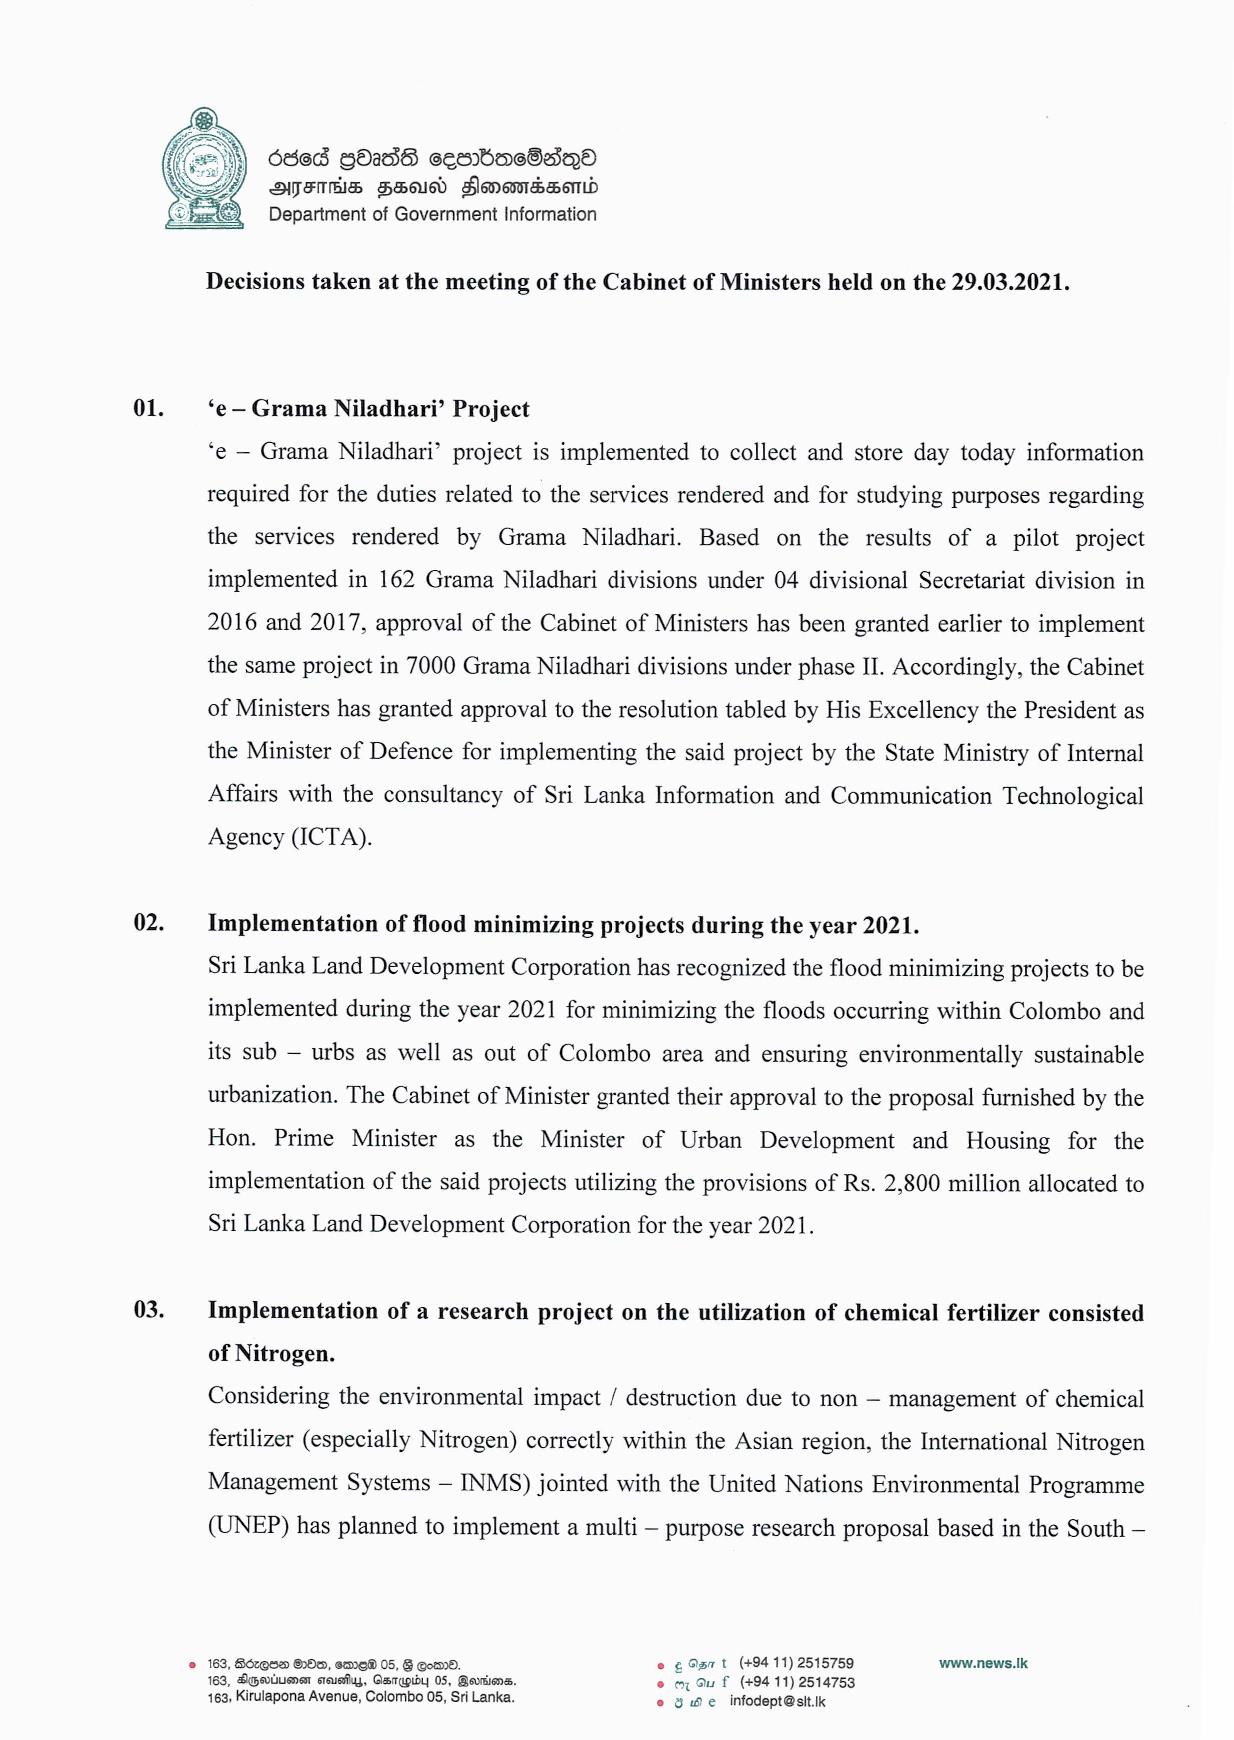 Cabinet Desision on 29.03.2021 English page 001